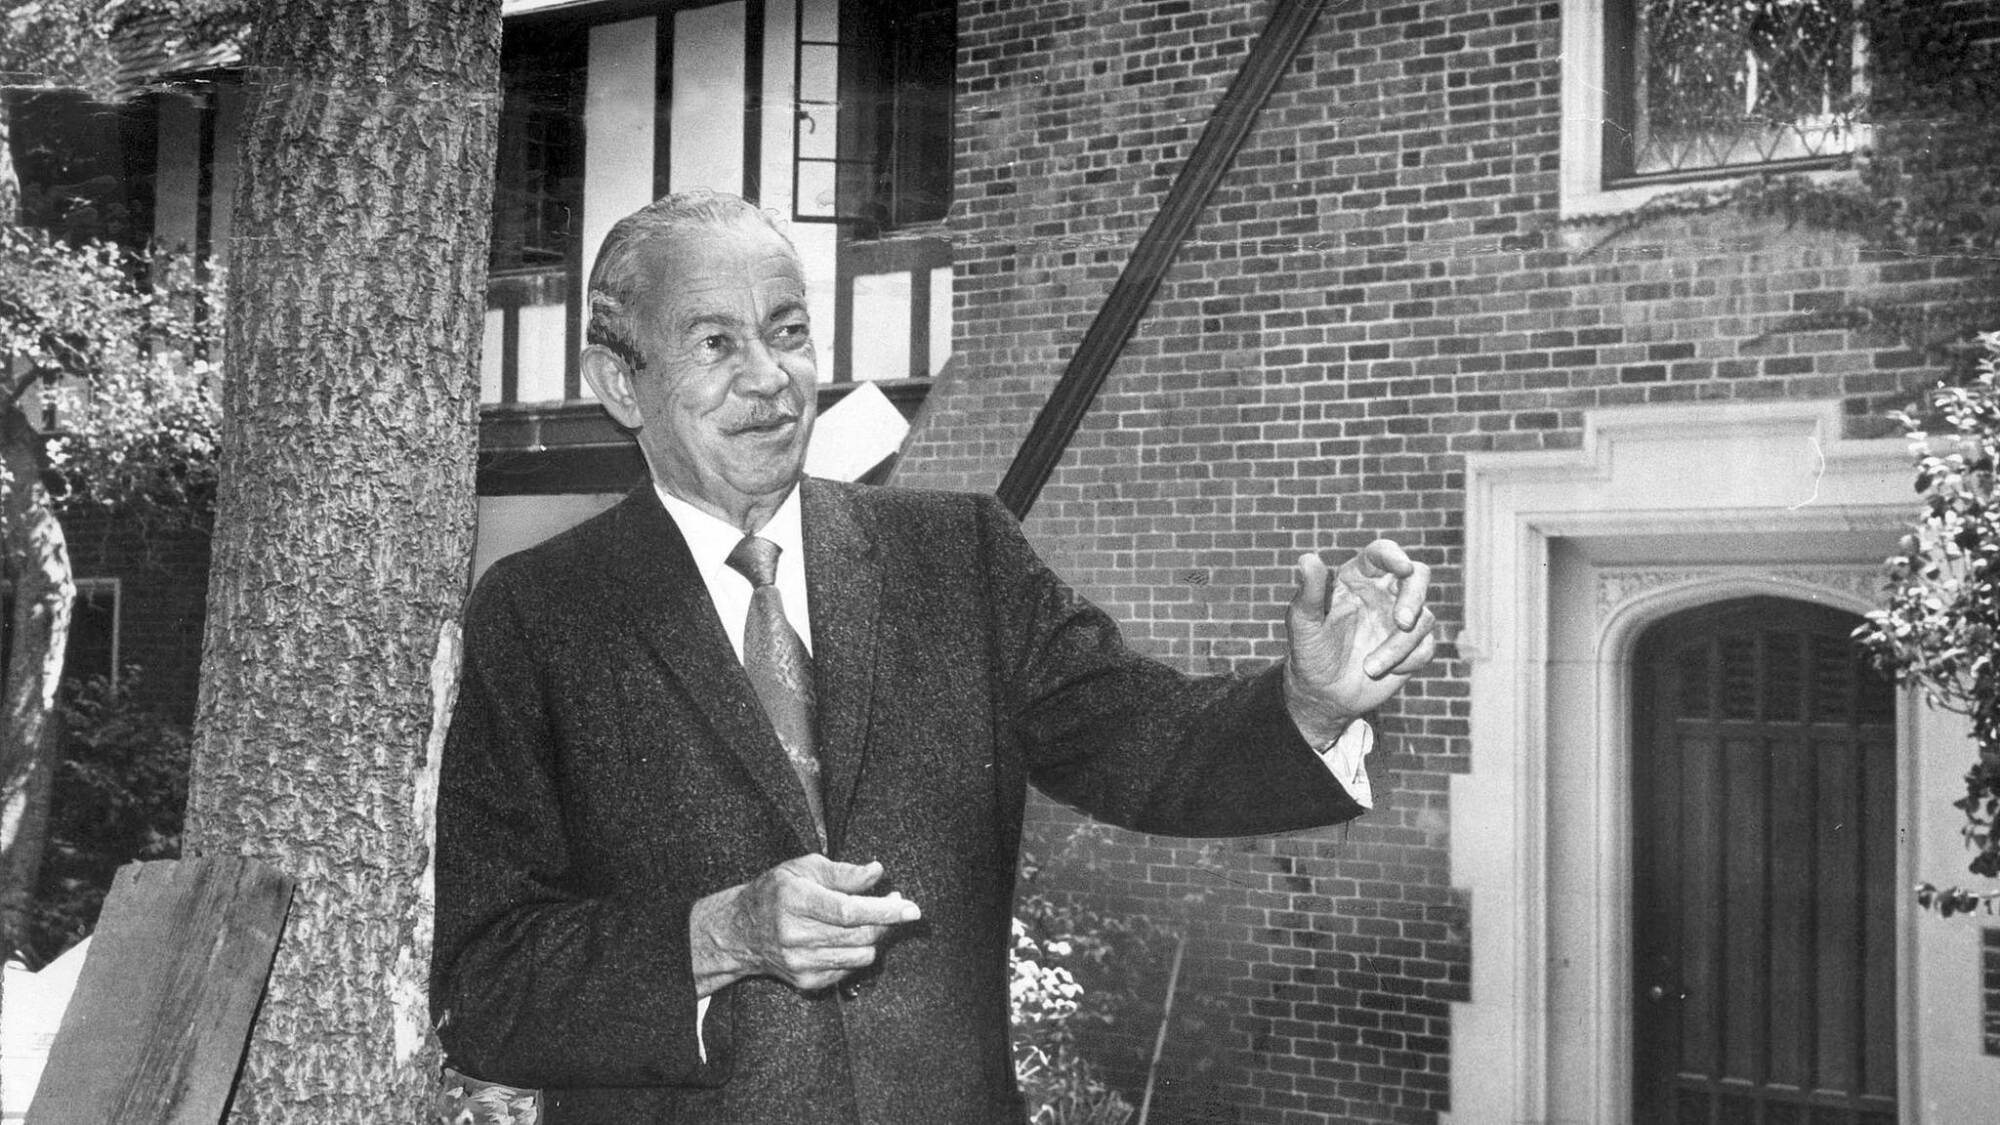 Architect Paul Revere Williams in 1970, standing before a Tudor mansion he designed in 1928.